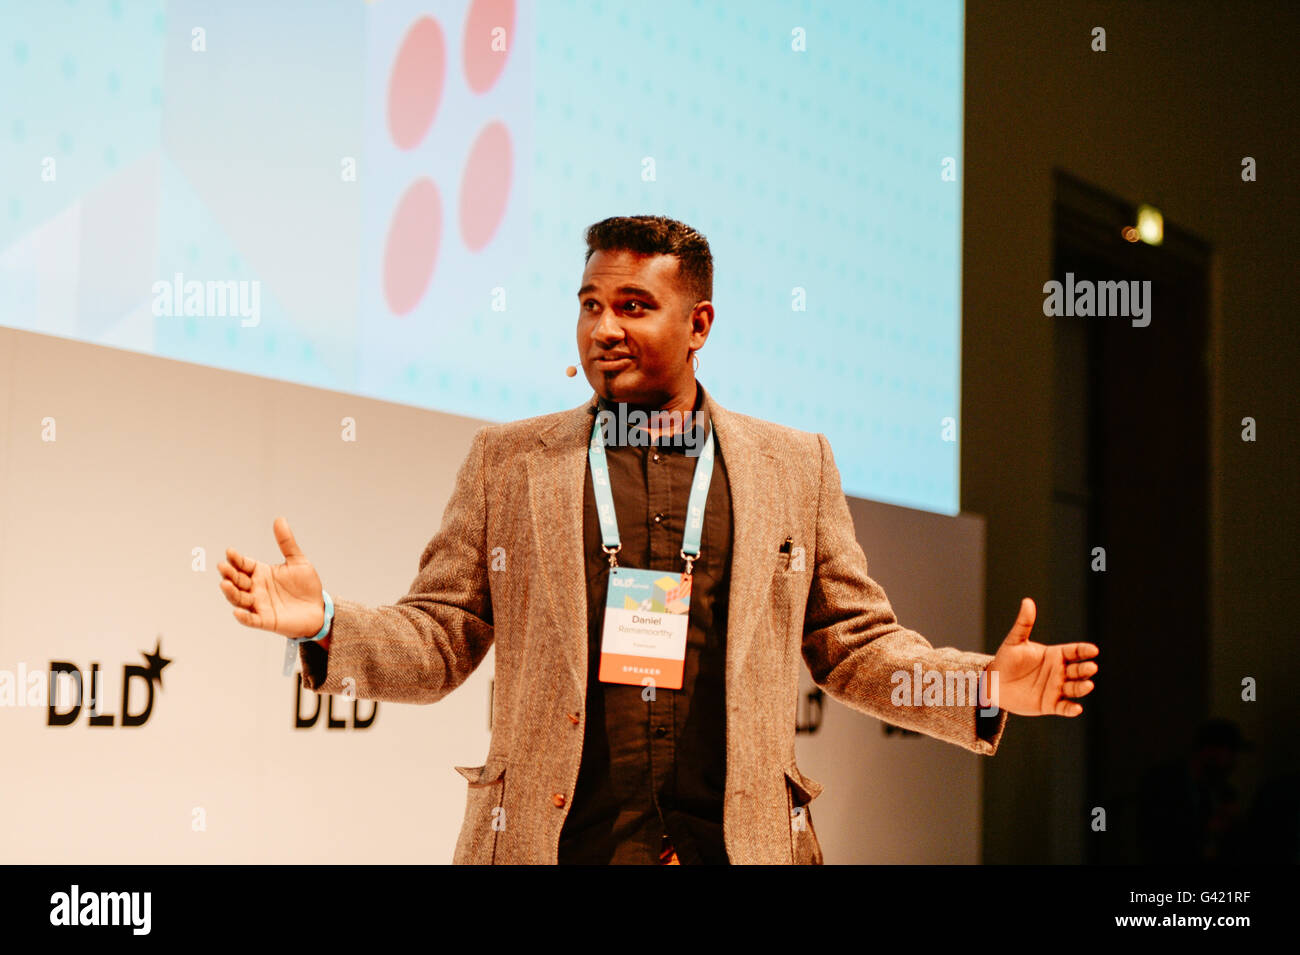 MUNICH/GERMANY - JUNE 16: Entrepreneur Daniel Ramamoorthy gestures speaking onstage during the DLDsummer Conference 2016 at Haus der Kunst, Munich. DLDsummer takes place June 16-17, 2016 and focuses on the changing through digitalization in the areas of life, work and business (Photo: picture alliance for DLD/Jan Haas) | usage worldwide Stock Photo